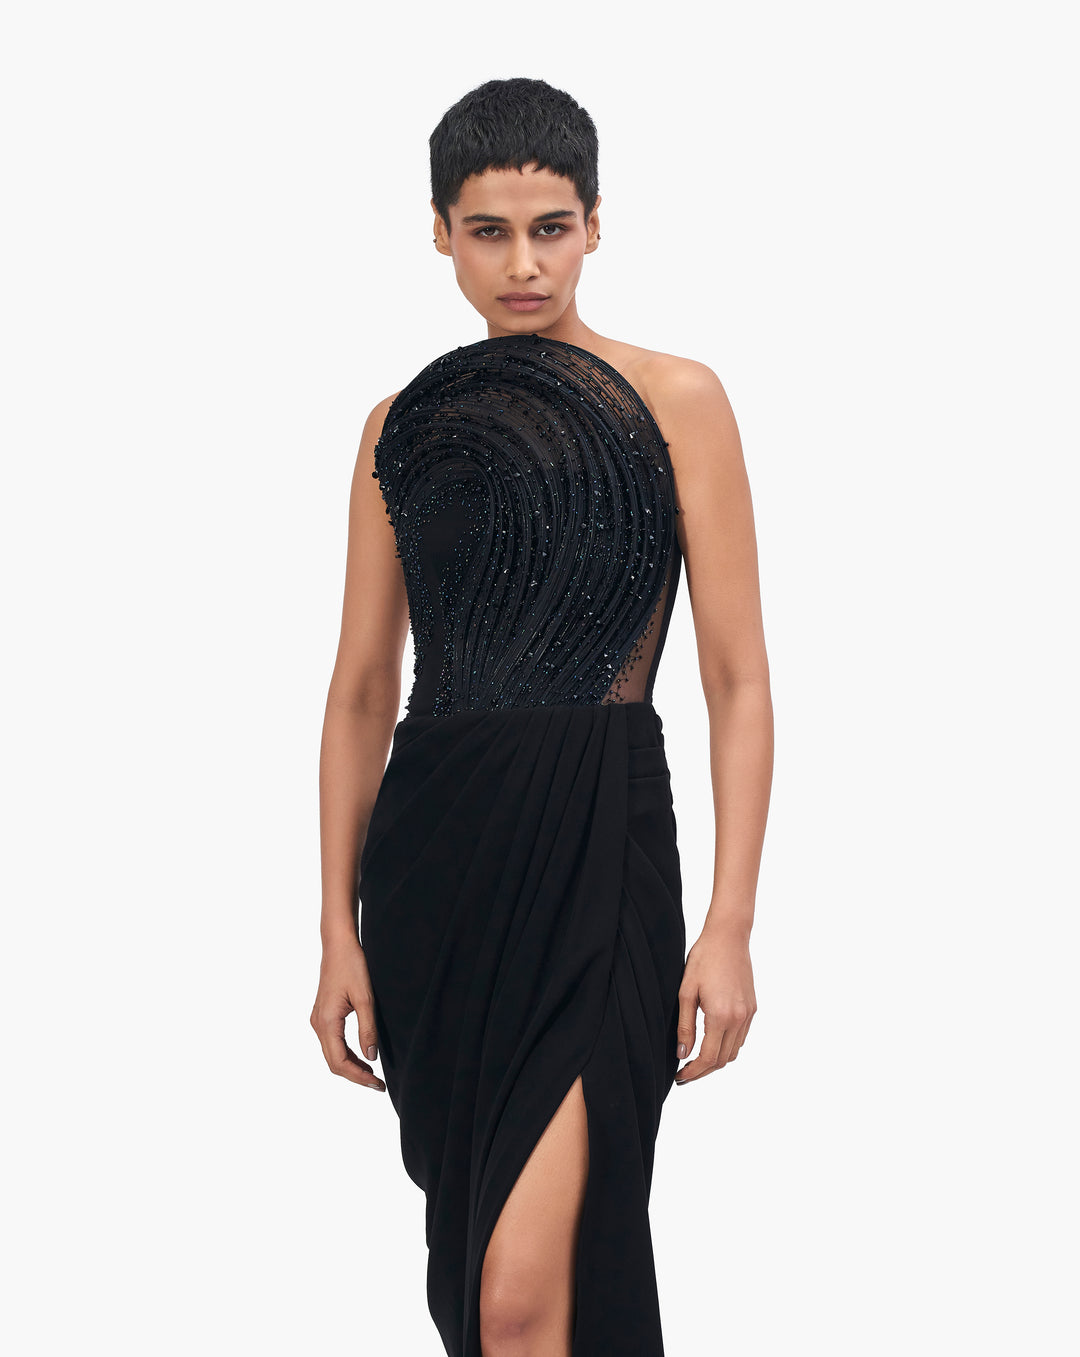 The Cosmic Sculpted Gown